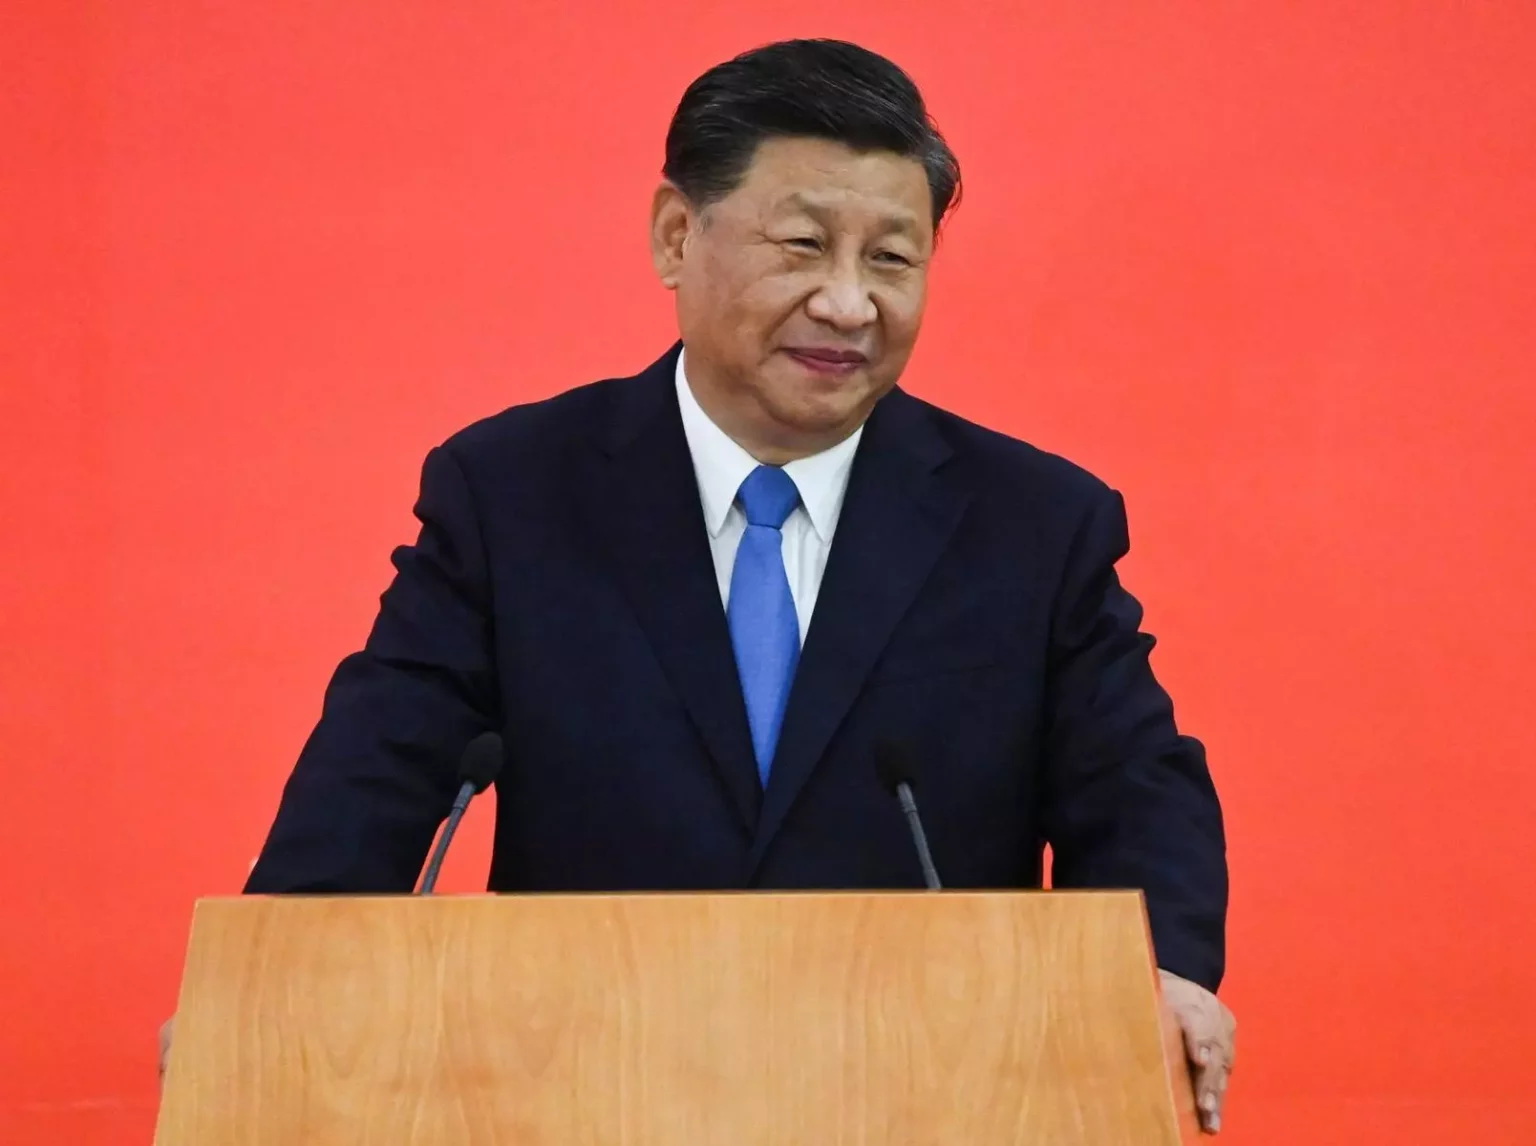 chinas-xi-jinping-says-economic-recovery-still-at-a-critical-stage-state-media